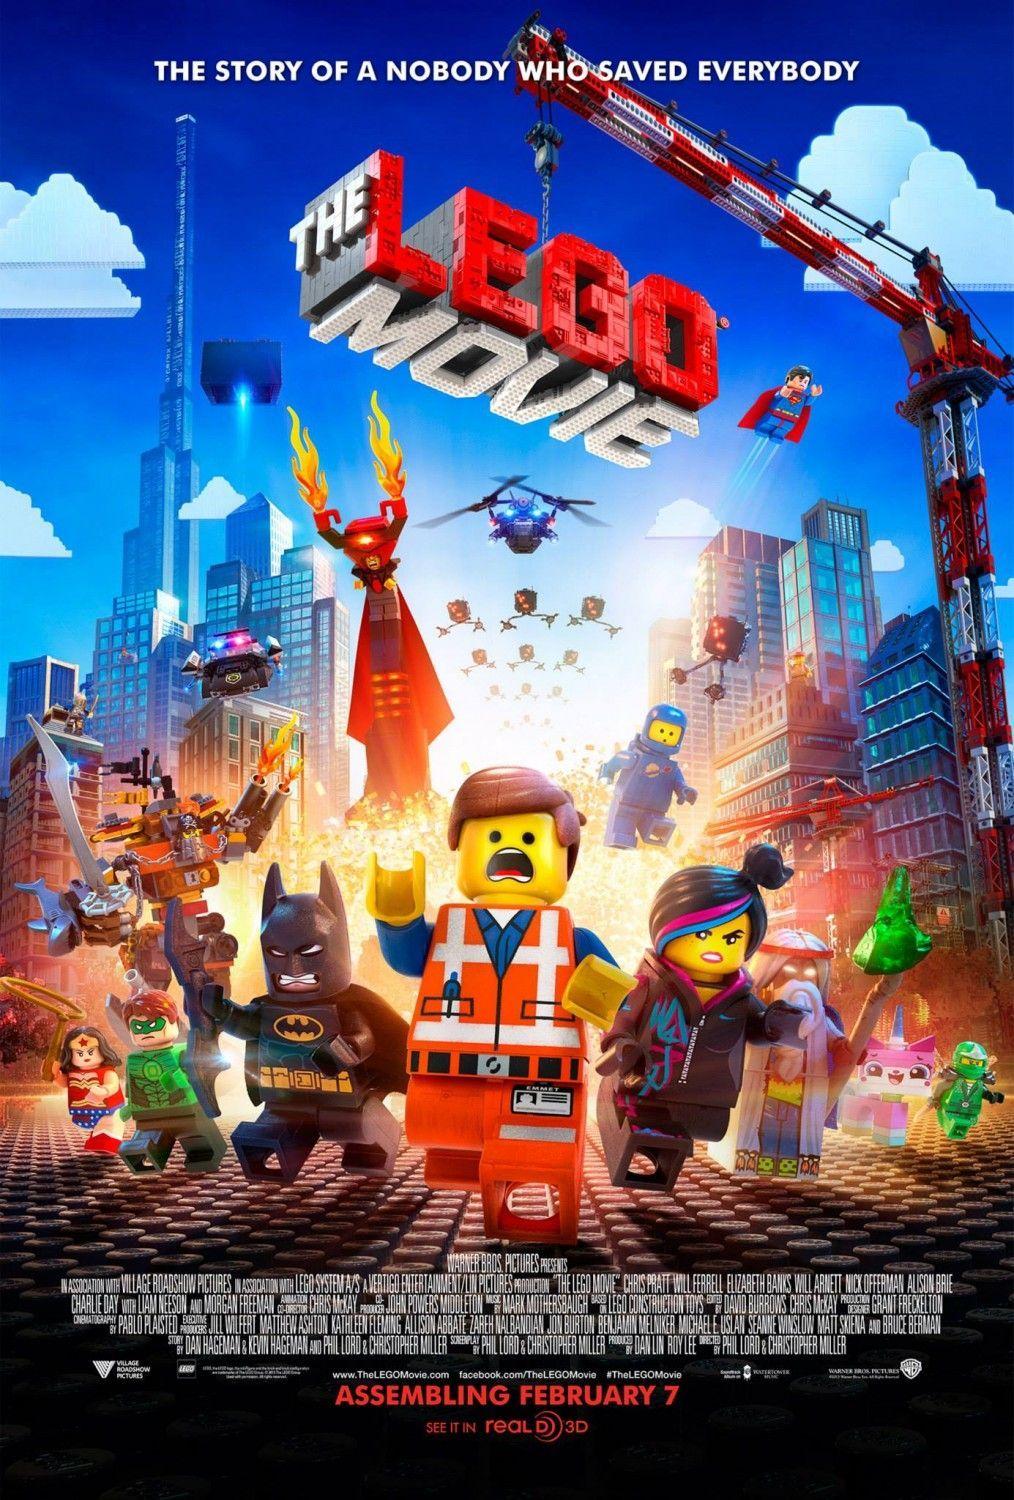 New The LEGO Movie Wallpaper, The LEGO Movie Wallpaper